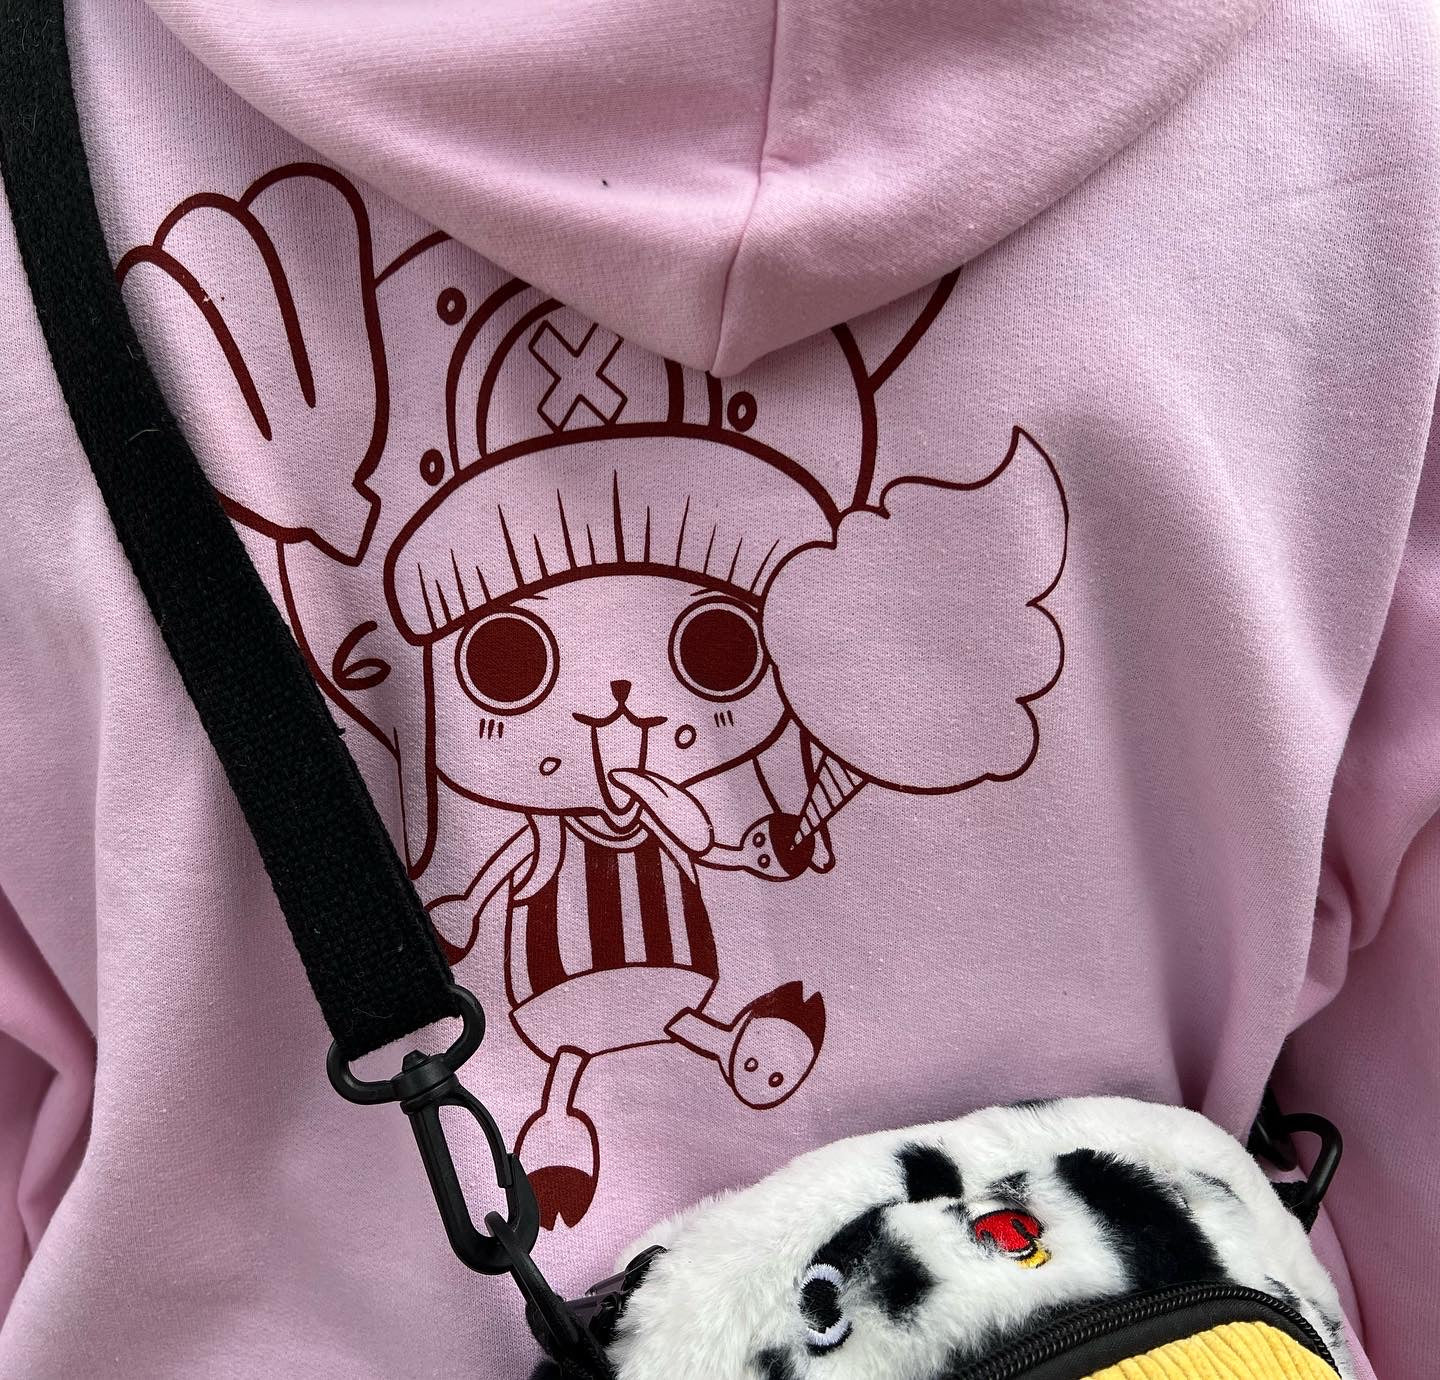 Cotton Candy Chop (Hoodie)